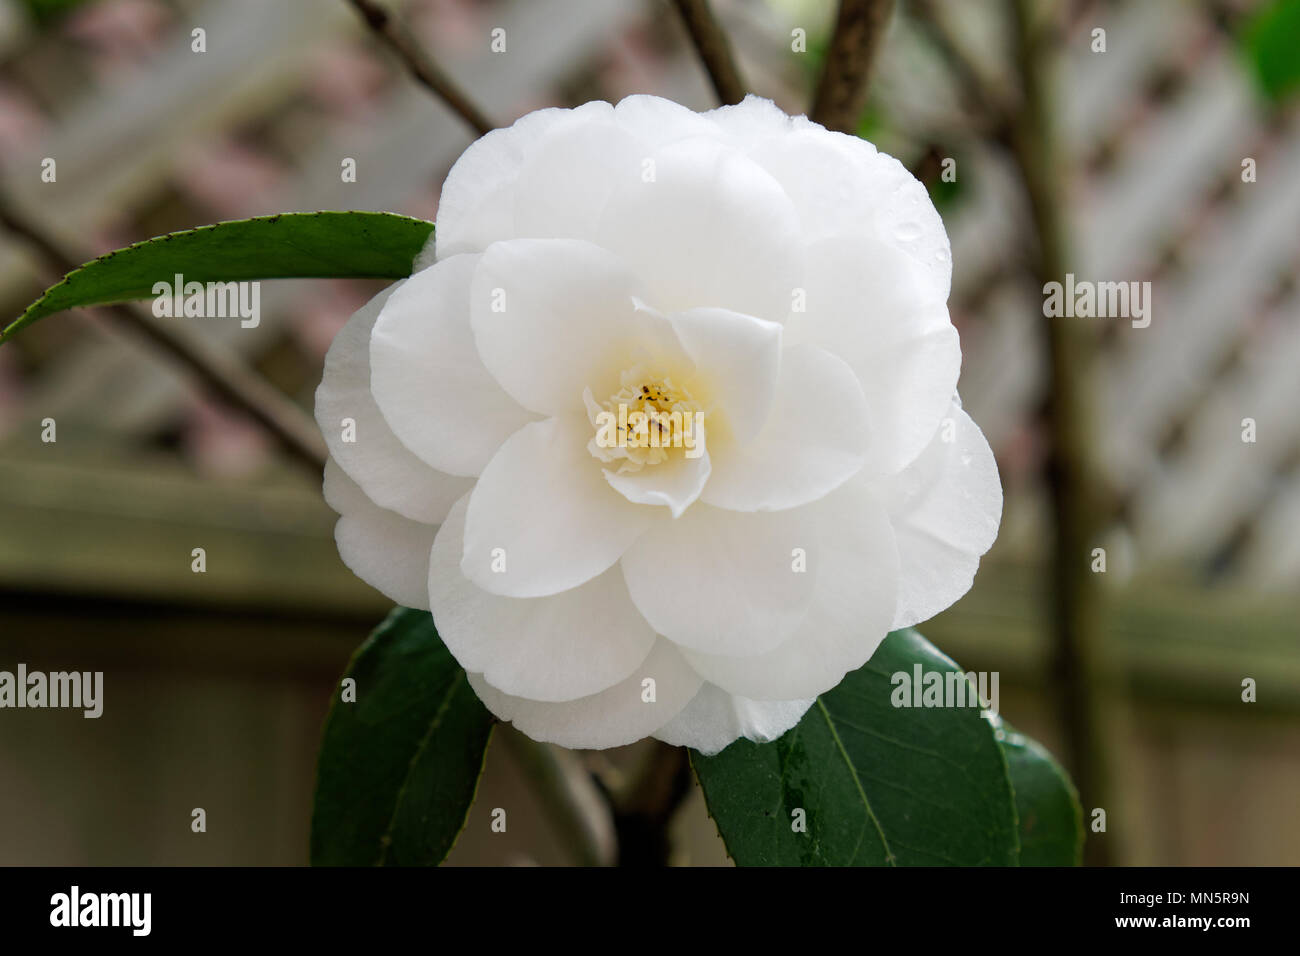 Close up of a white camellia flower blooming in spring, Vancouver, BC, Canada Stock Photo